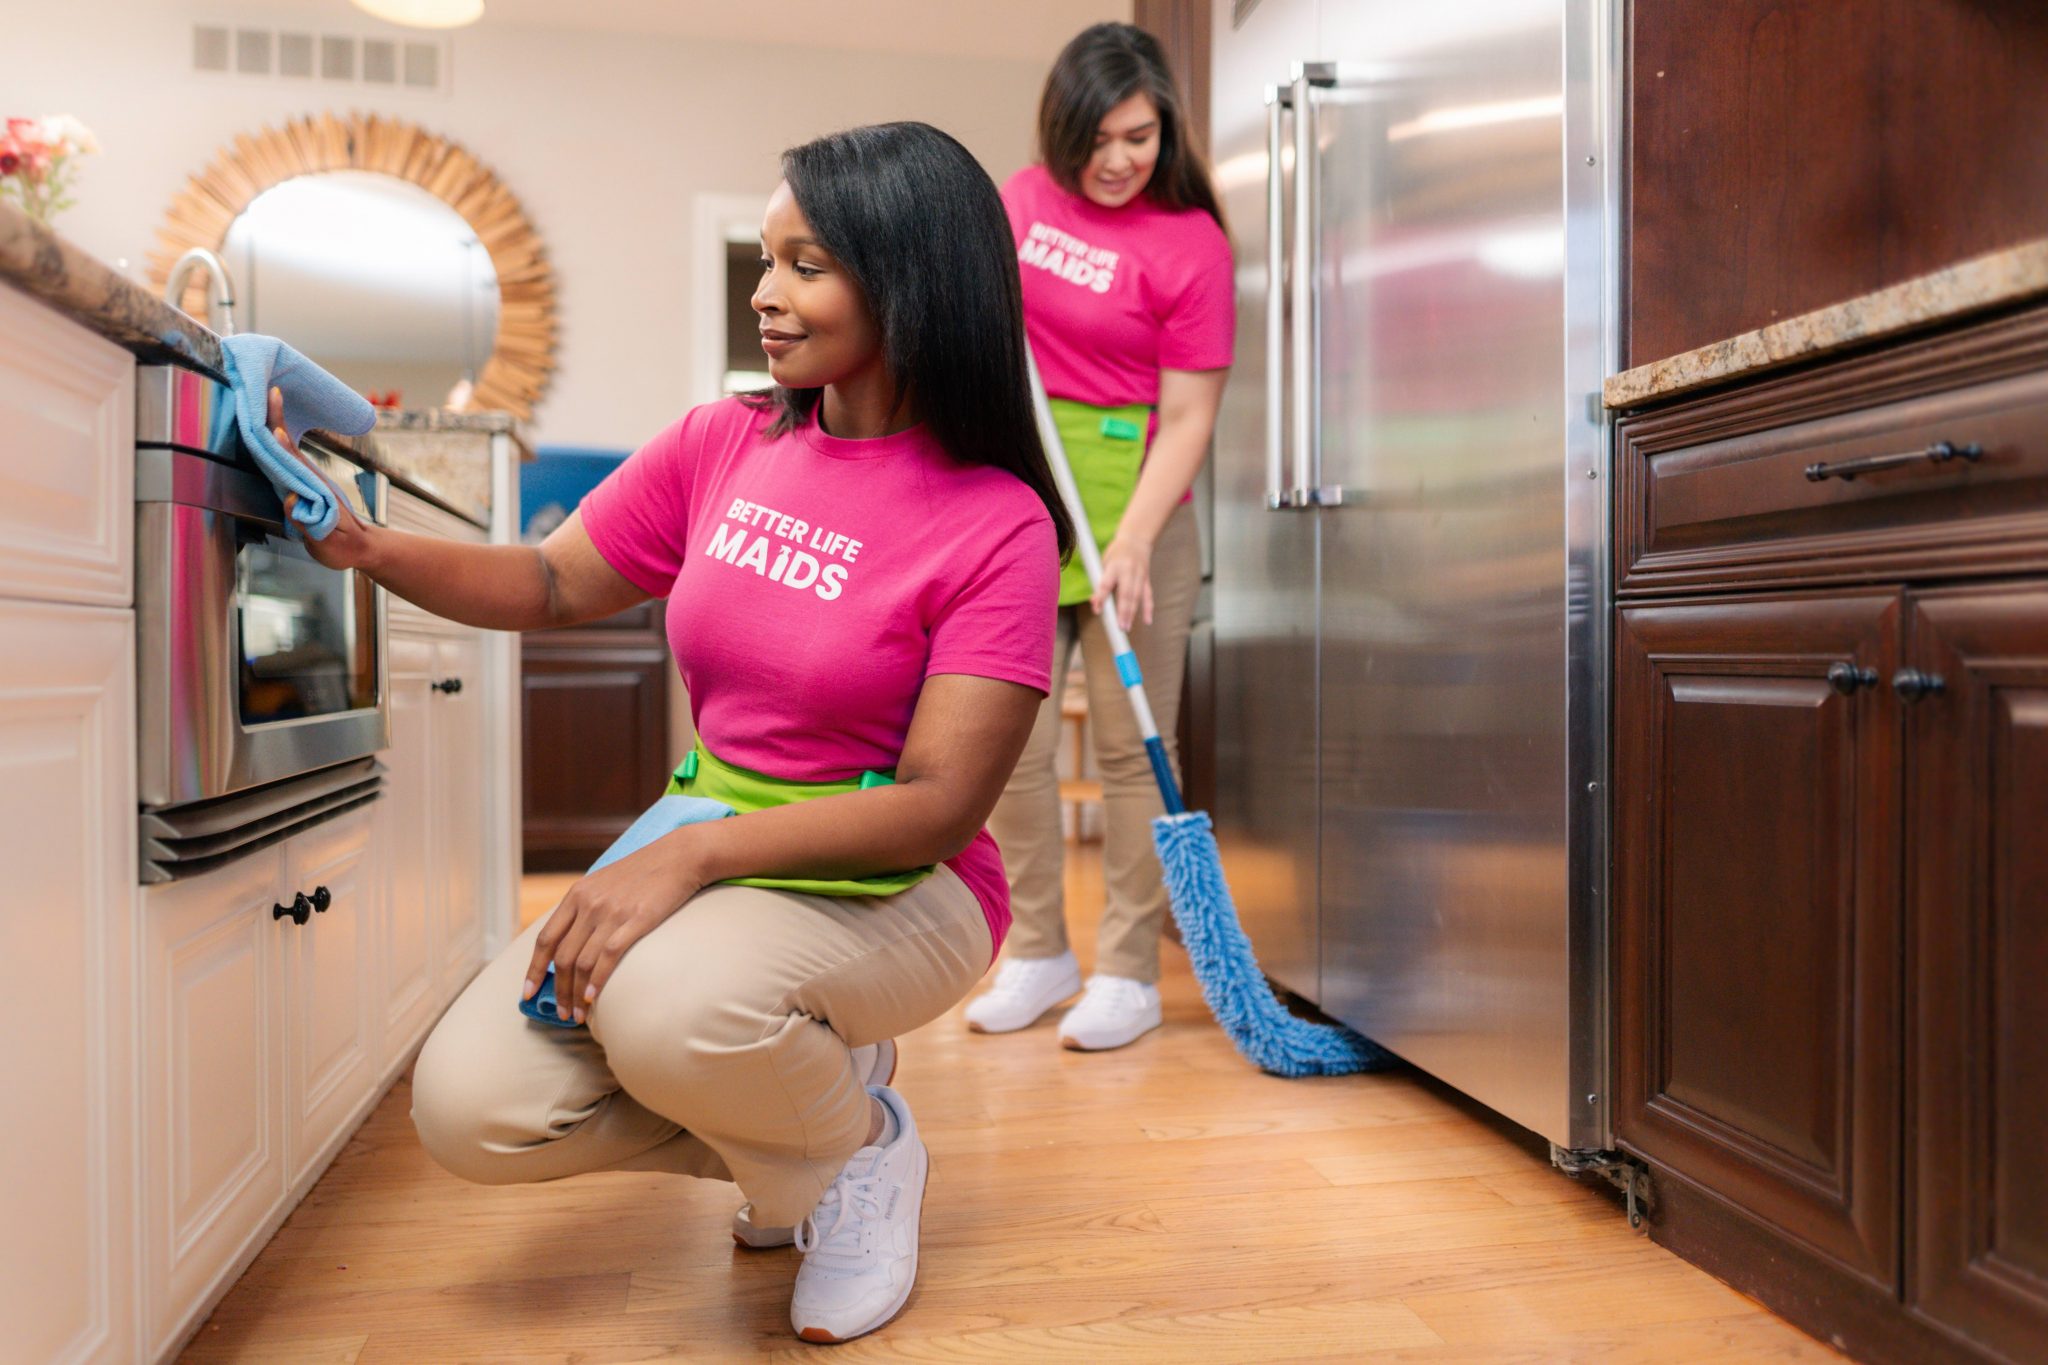 o'fallon house cleaning, best cleaners on o'fallon, bets maids in o'fallon, maids in o'fallon, o'fallon maid services, residential cleaning